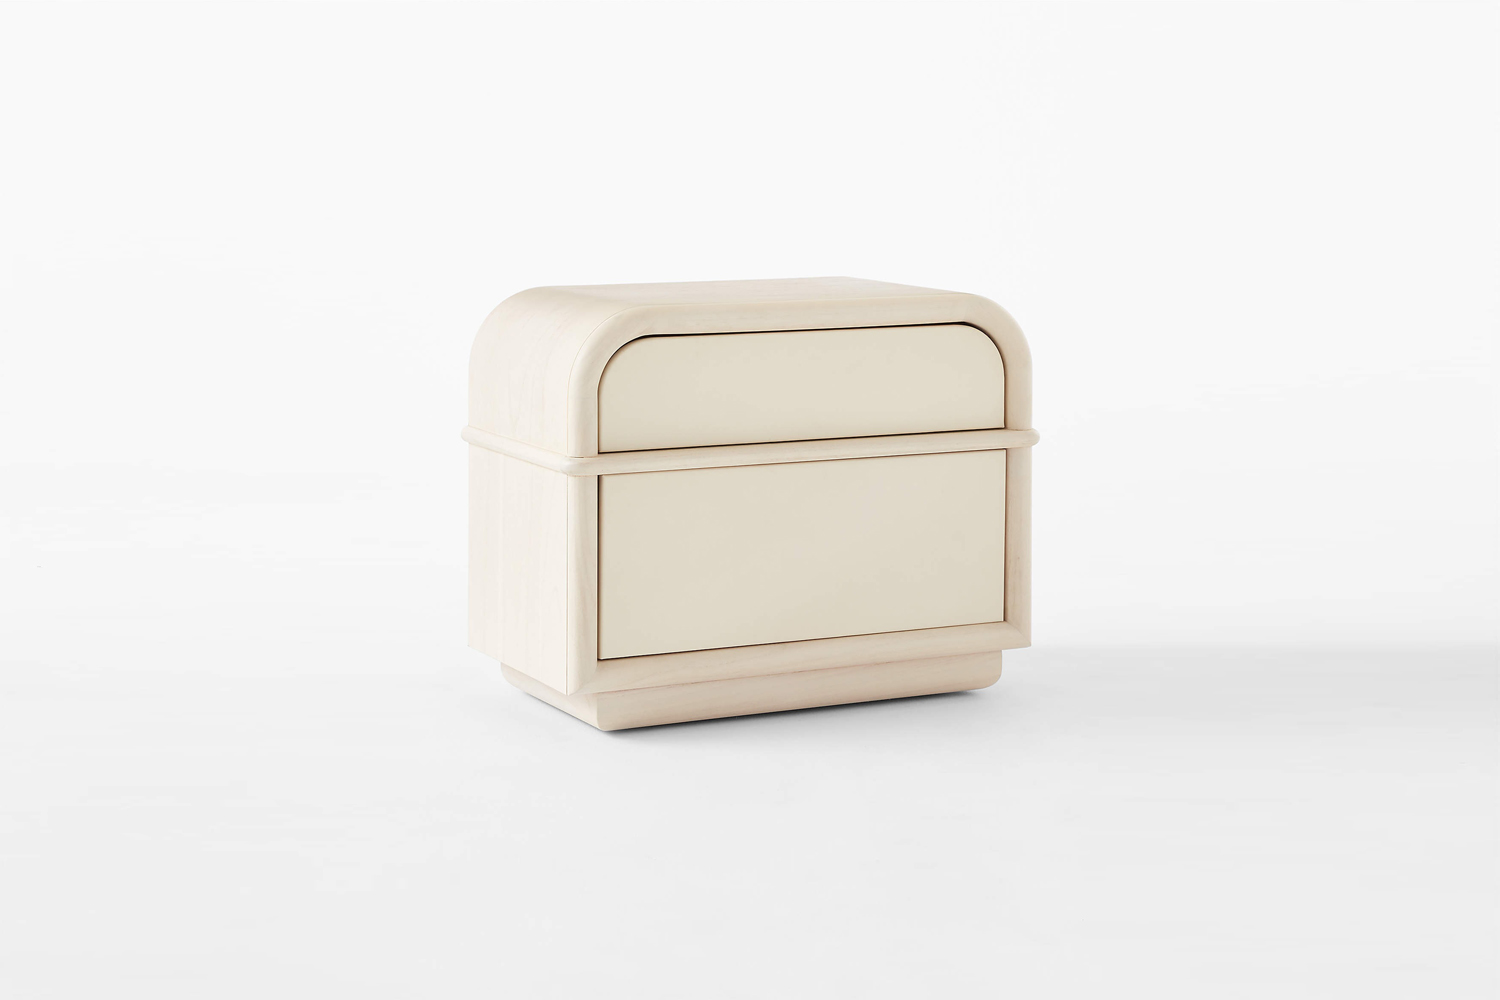 the lobos \2 drawer white wood nightstand is finished in ivory colored soft nap 22